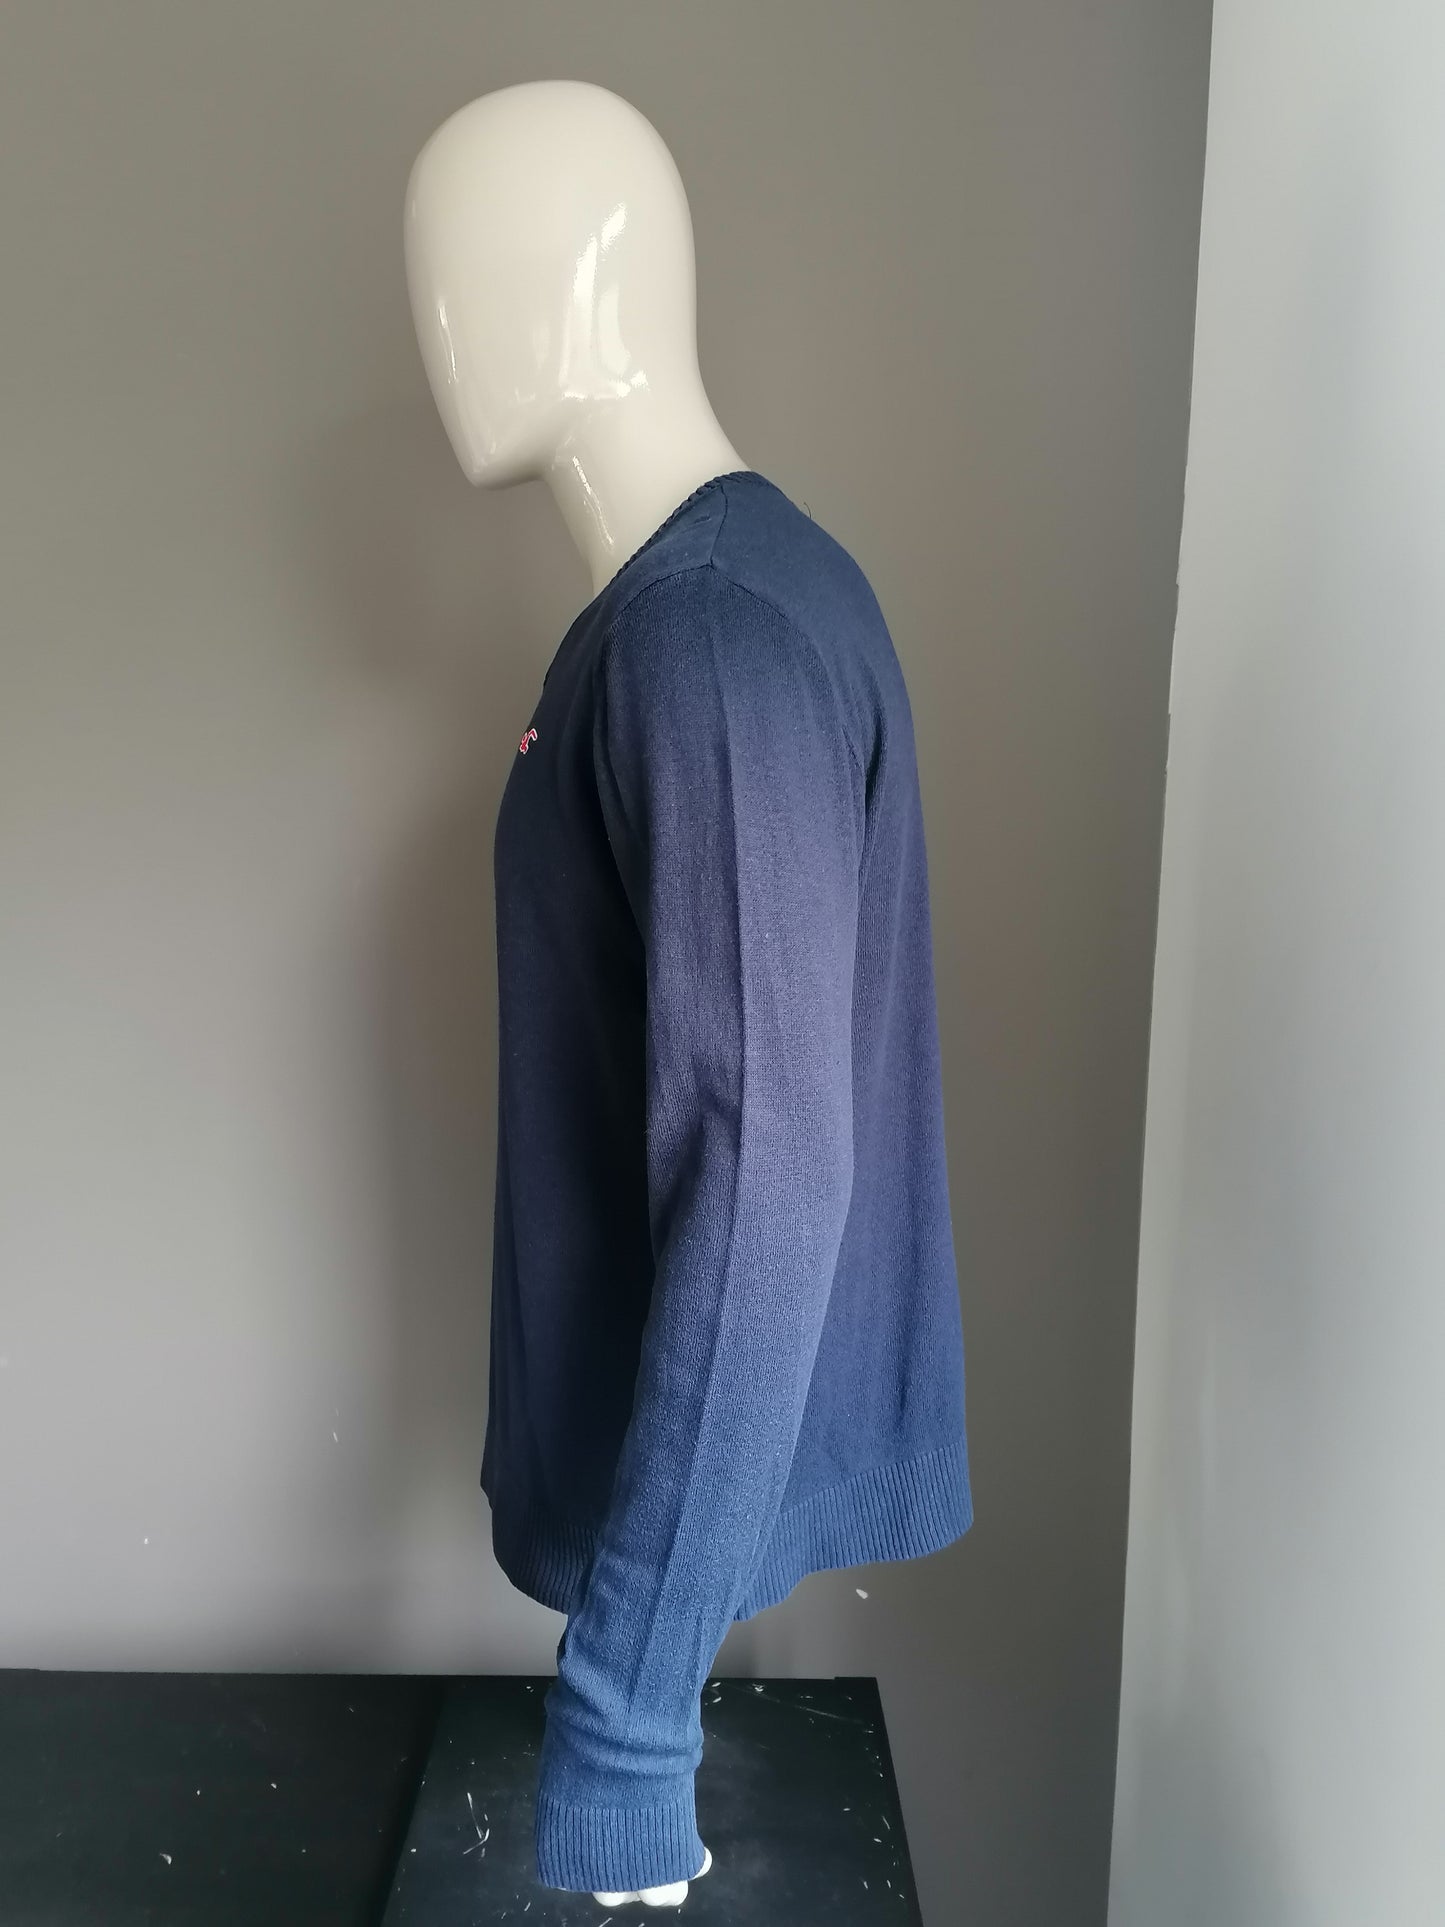 Hollister sweater with V-neck. Dark blue colored. Size XL.